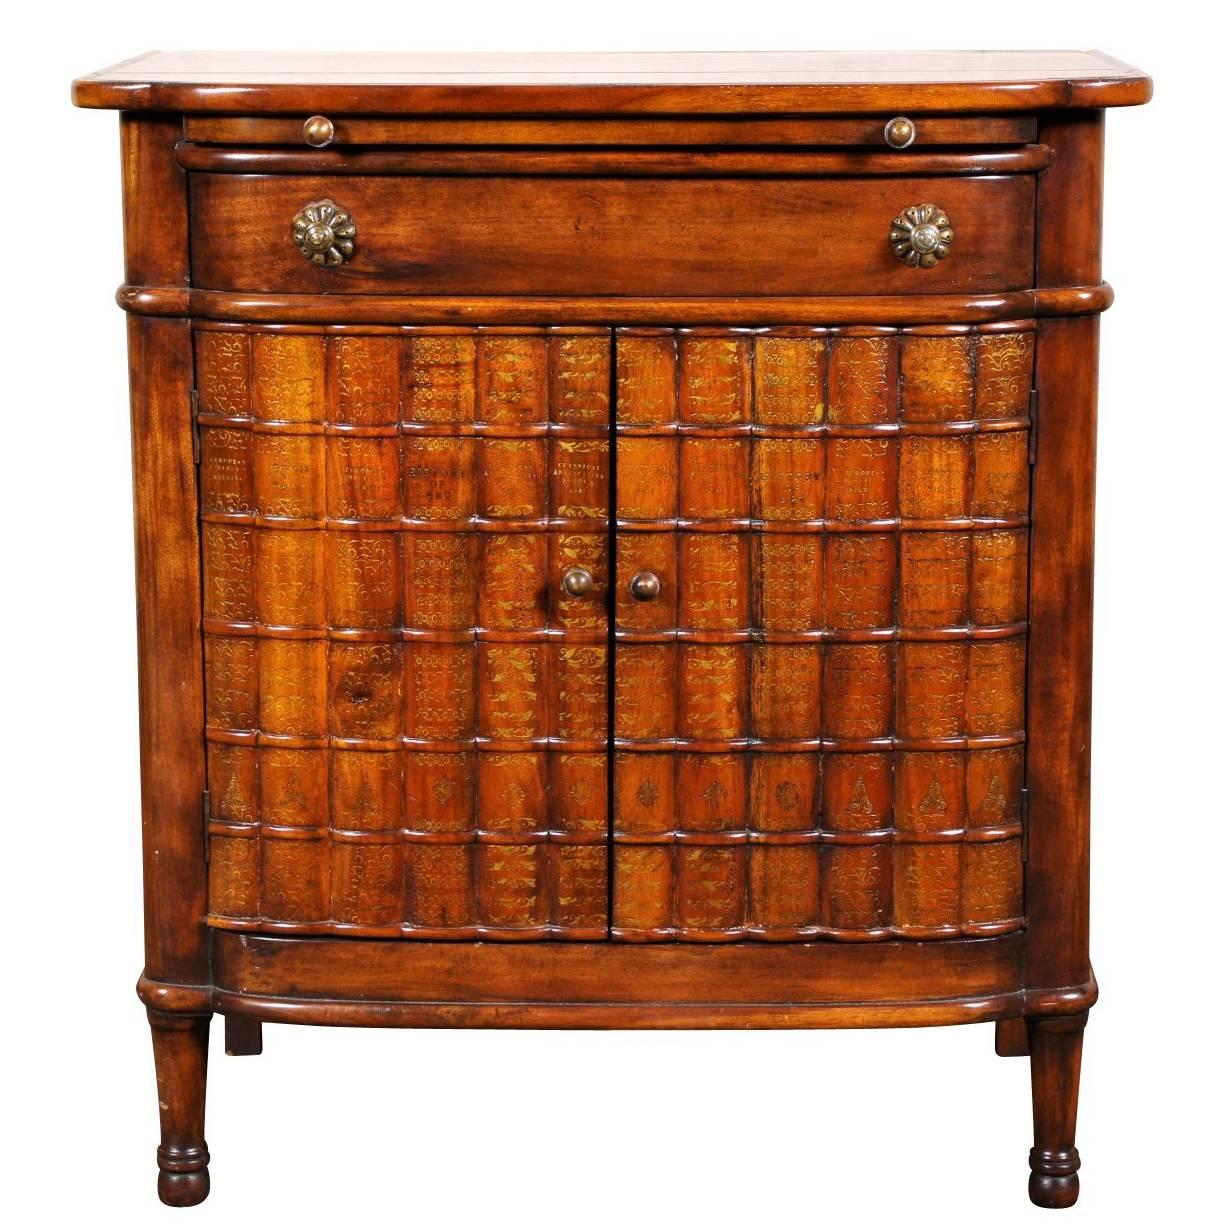 Theodore and Alexander Walnut Cabinet with Faux Wood Book Doors